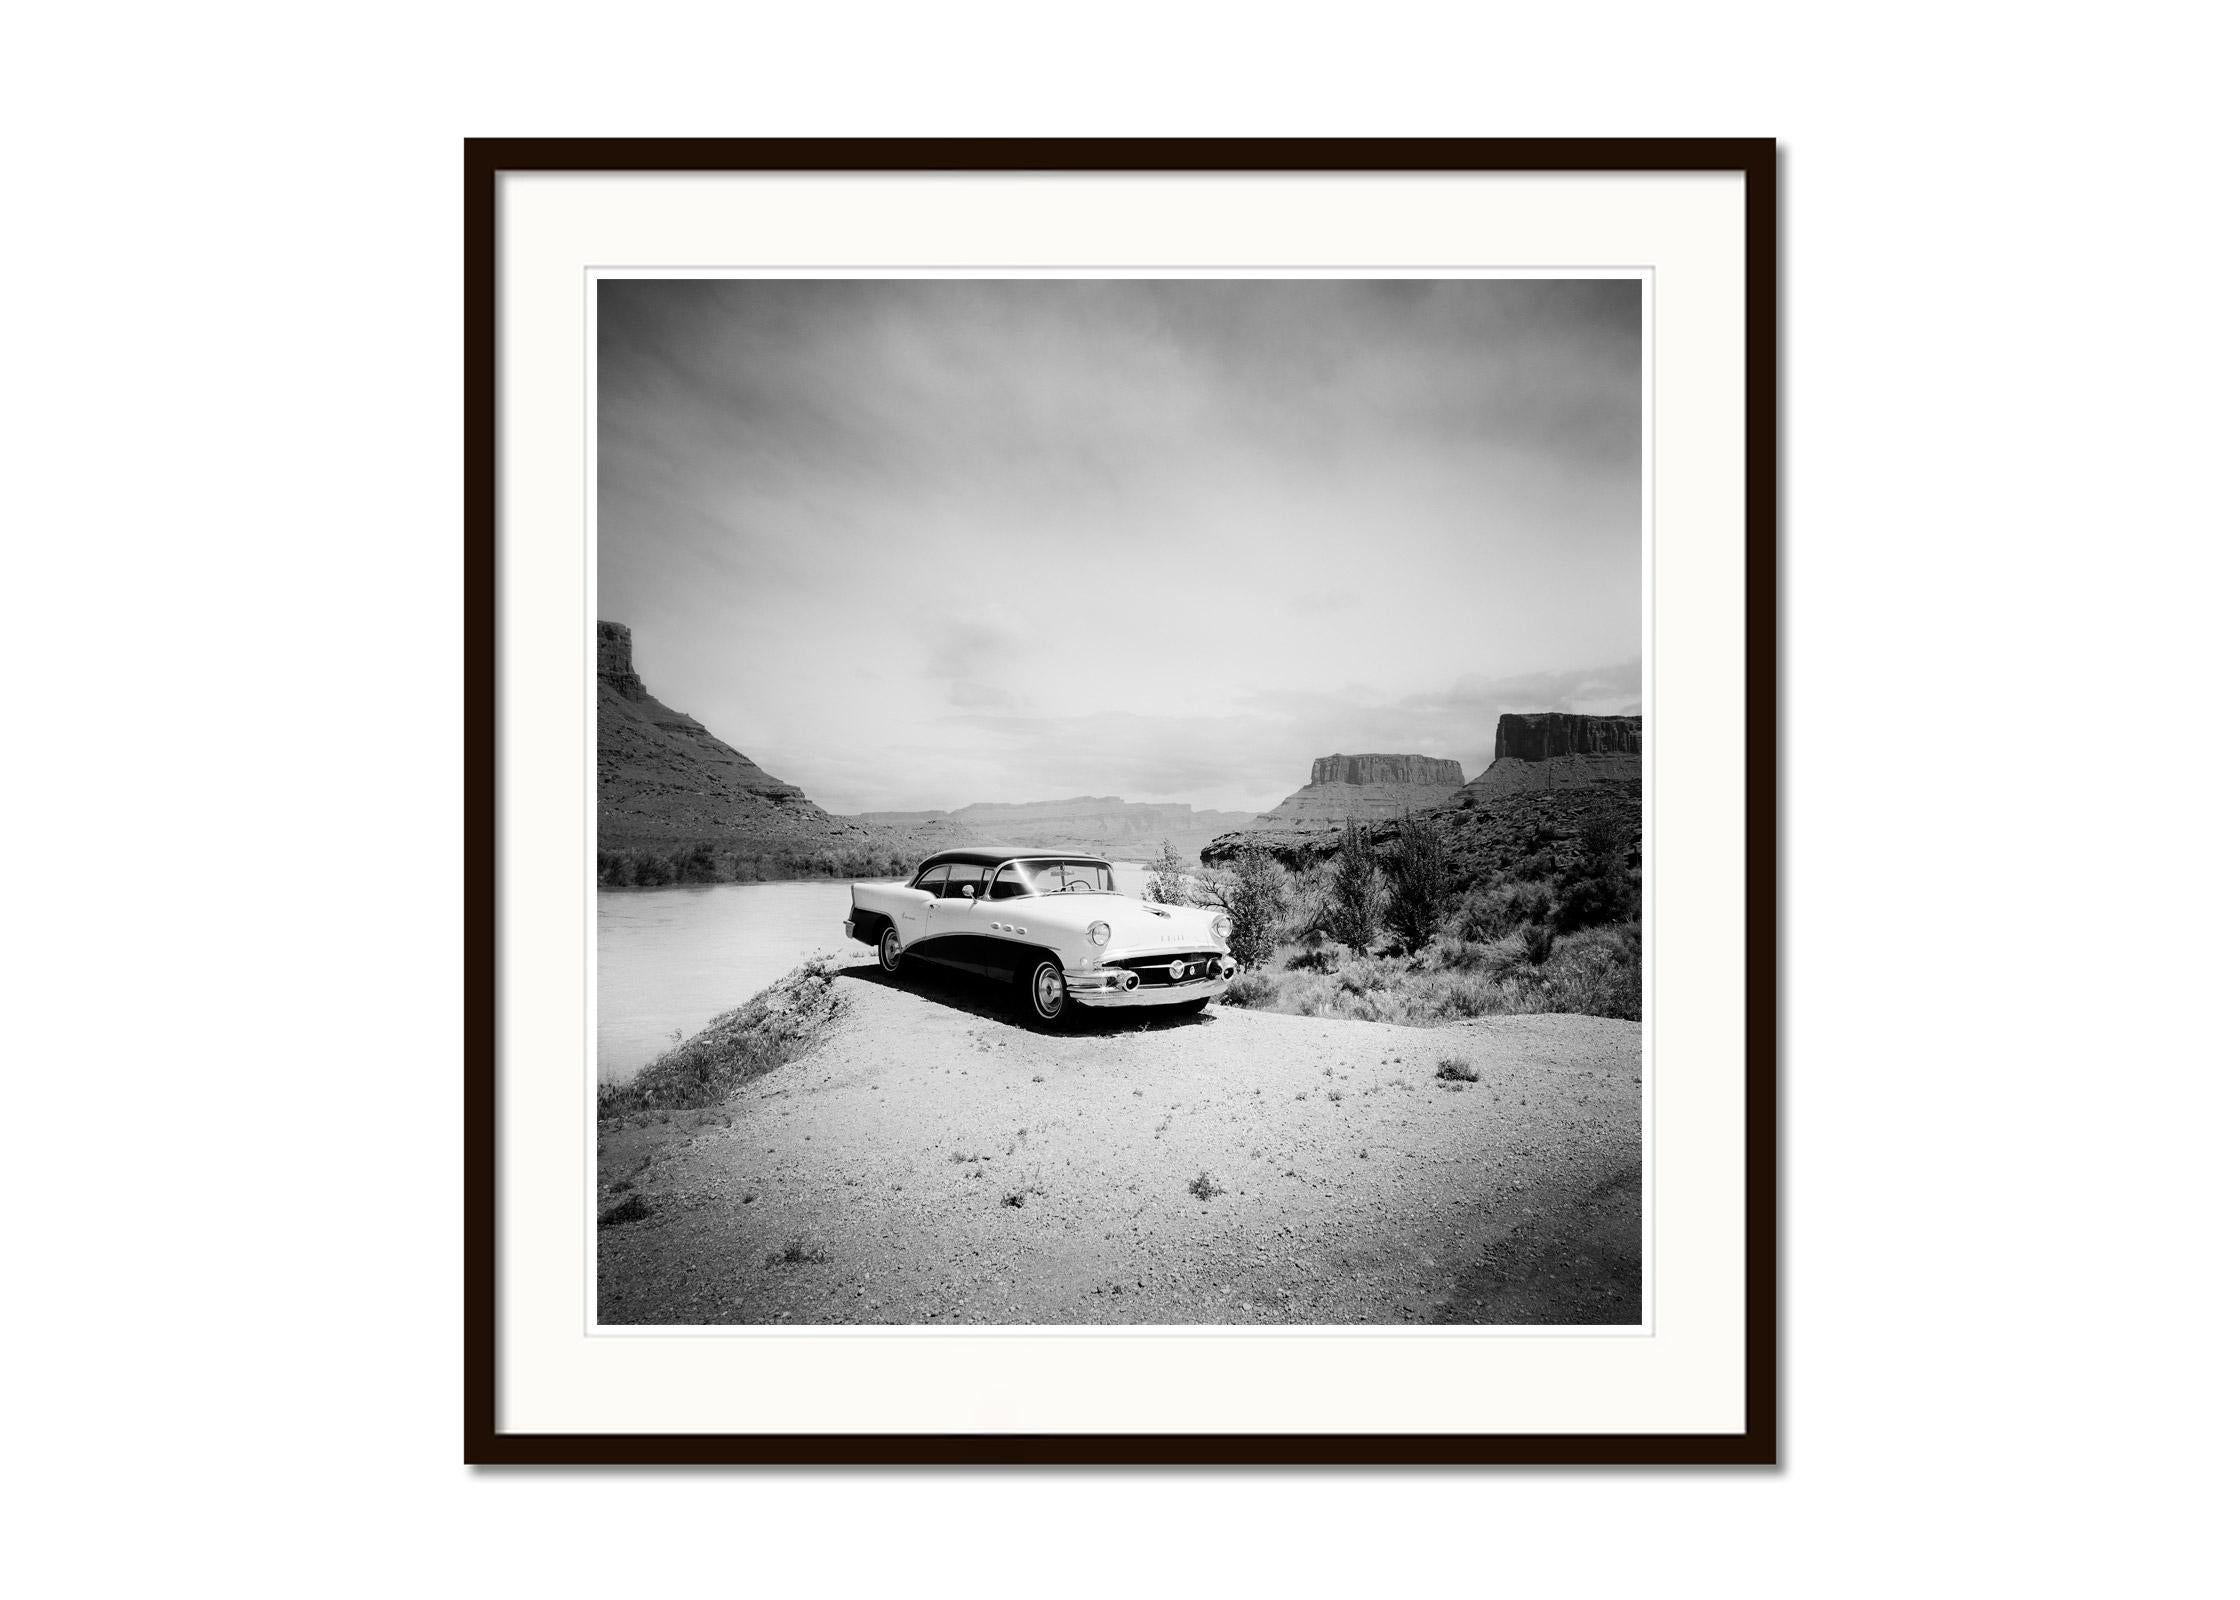 Buick 60 Century Convertible, Desert, USA, black and white landscape photography - Gray Black and White Photograph by Gerald Berghammer